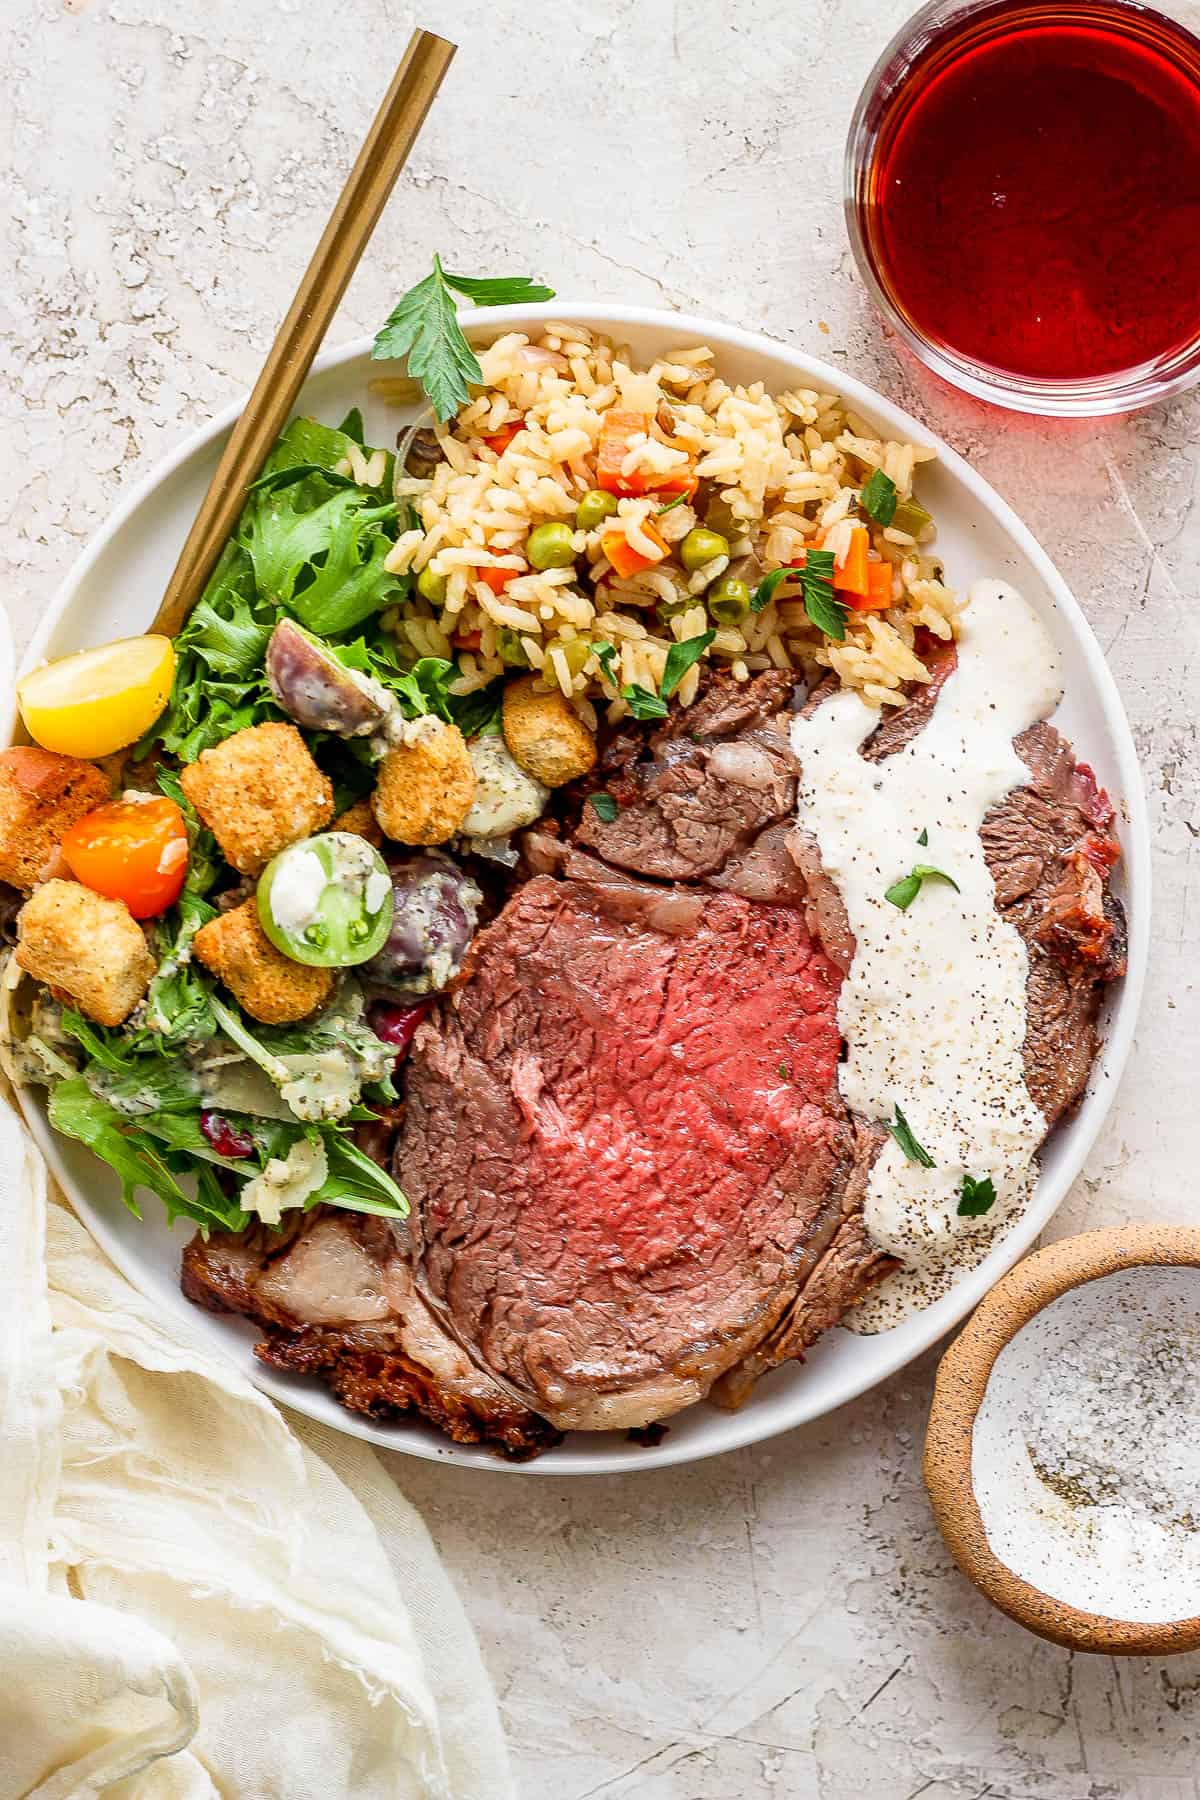 The perfect slice of grilled prime rib with horseradish sauce and a house salad and rice pilaf on the side.